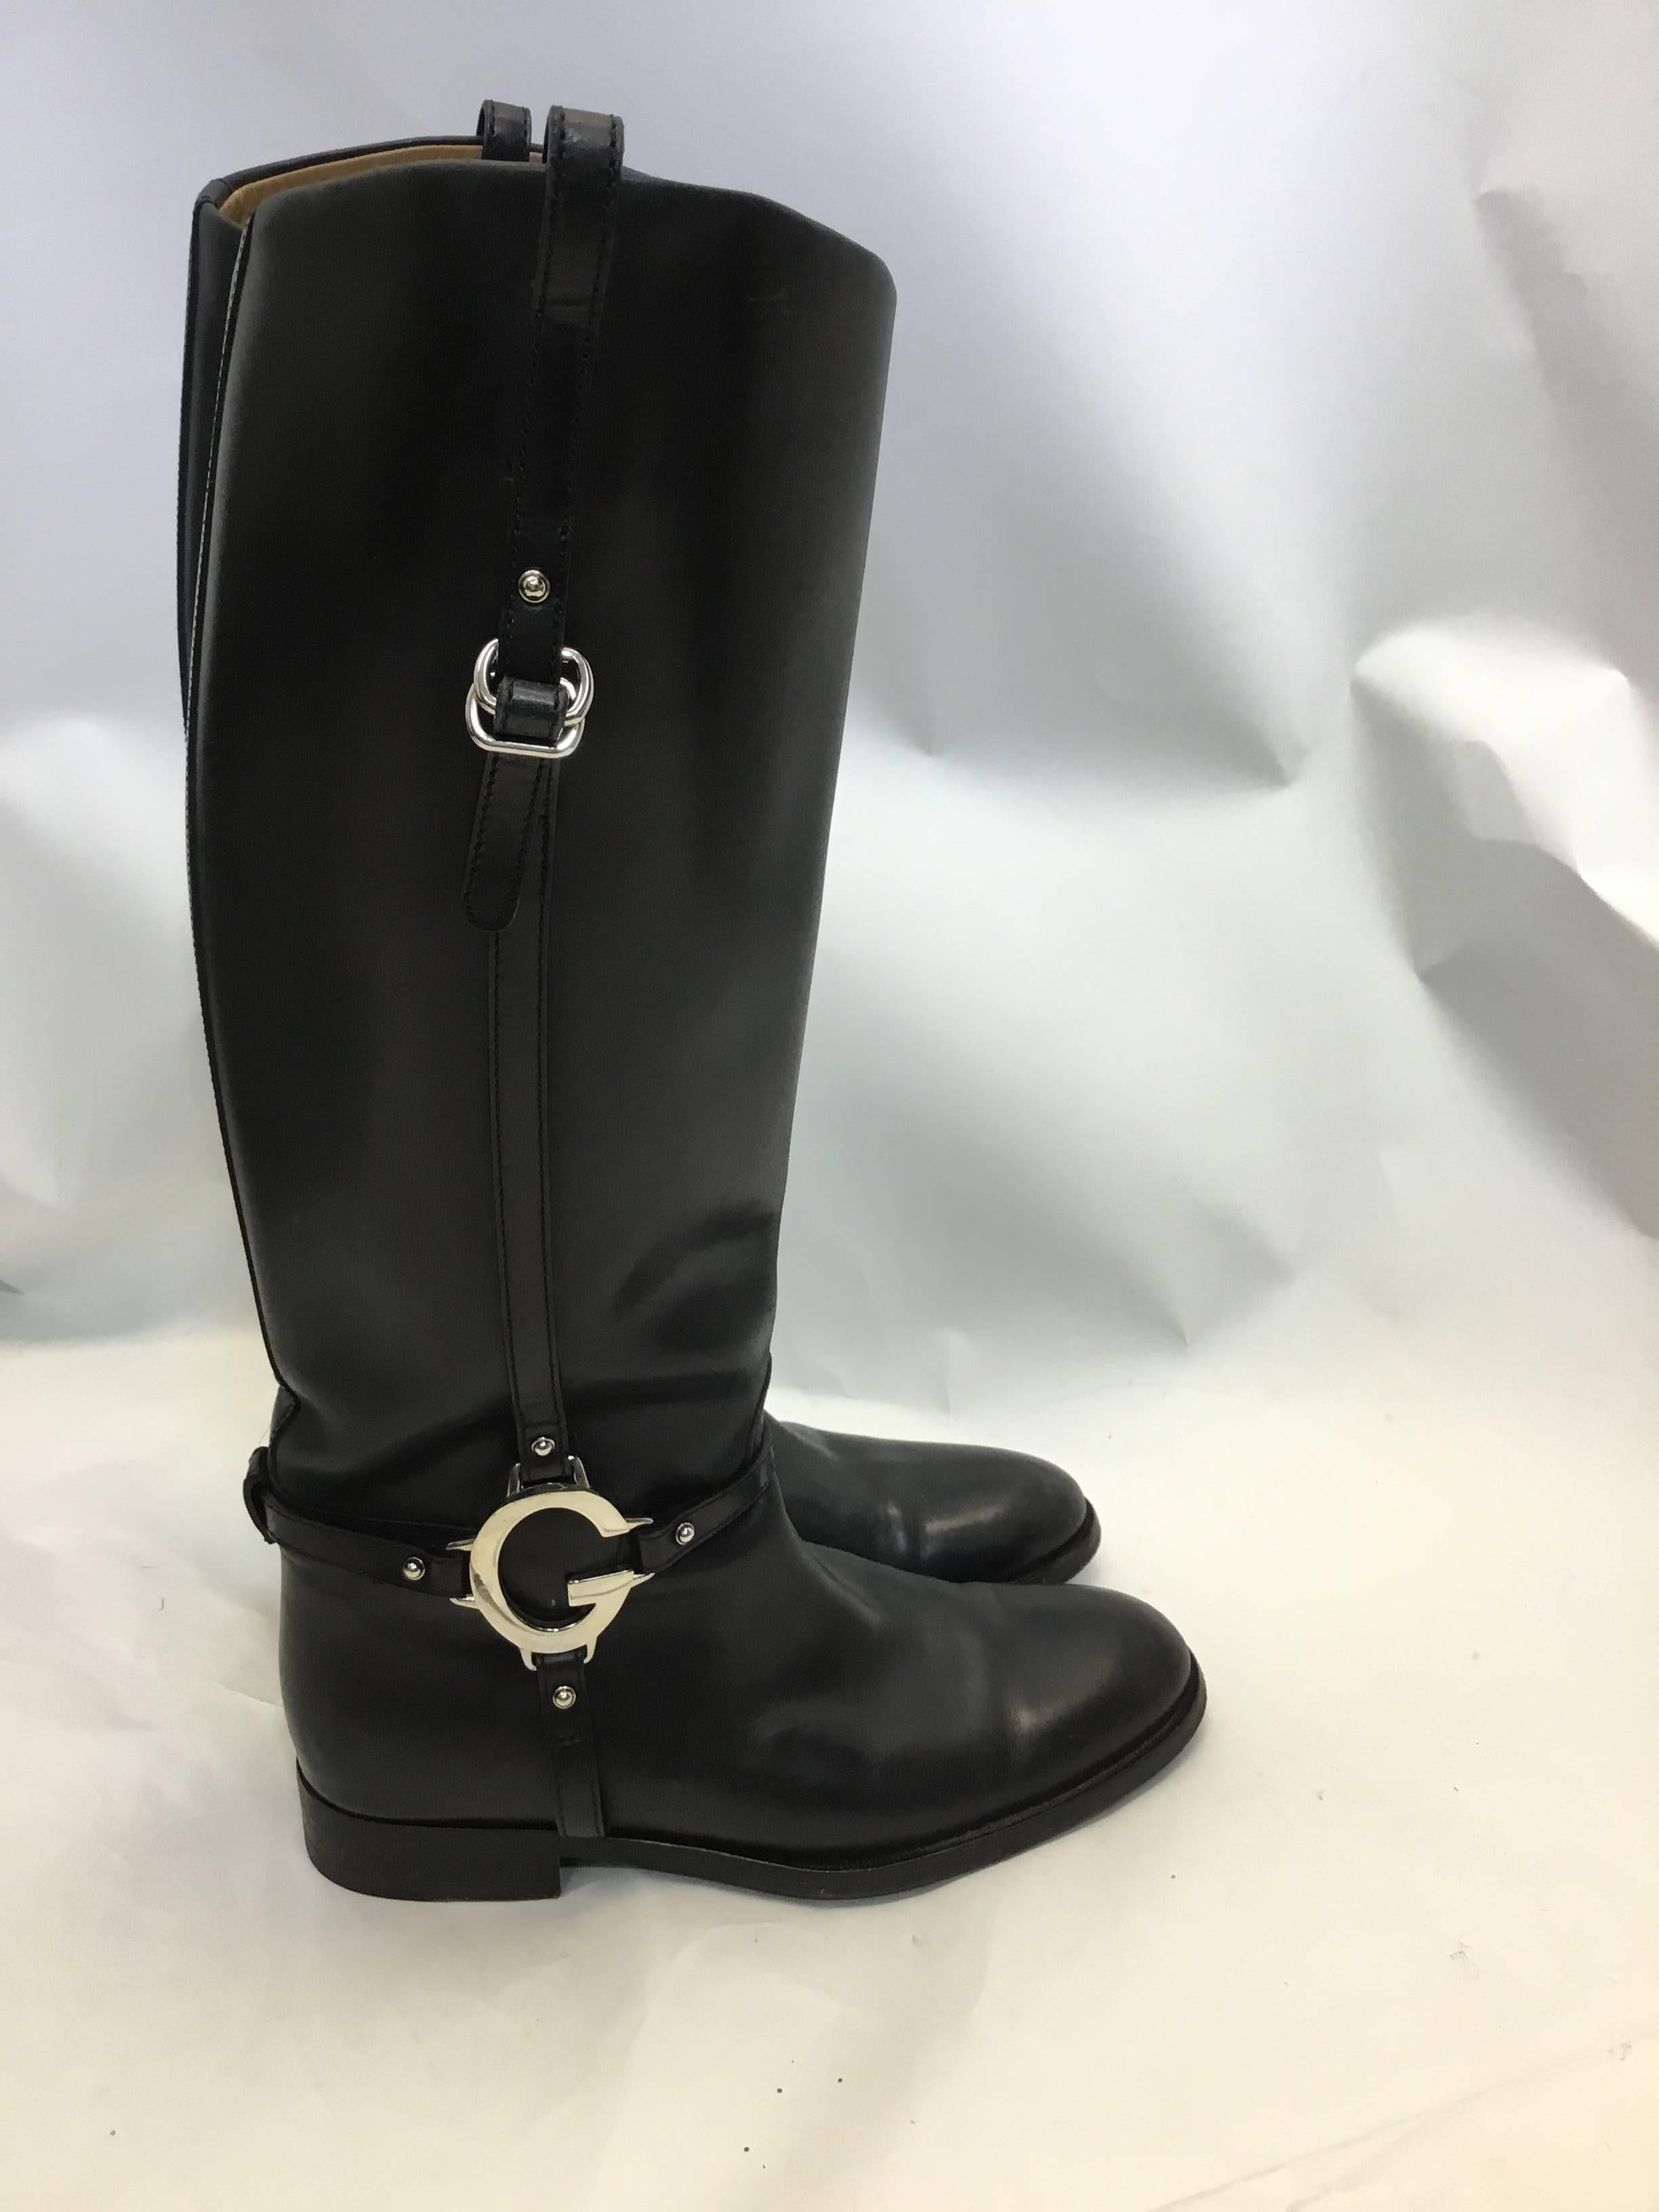 Gucci Black Leather Riding Boots In Excellent Condition For Sale In Narberth, PA